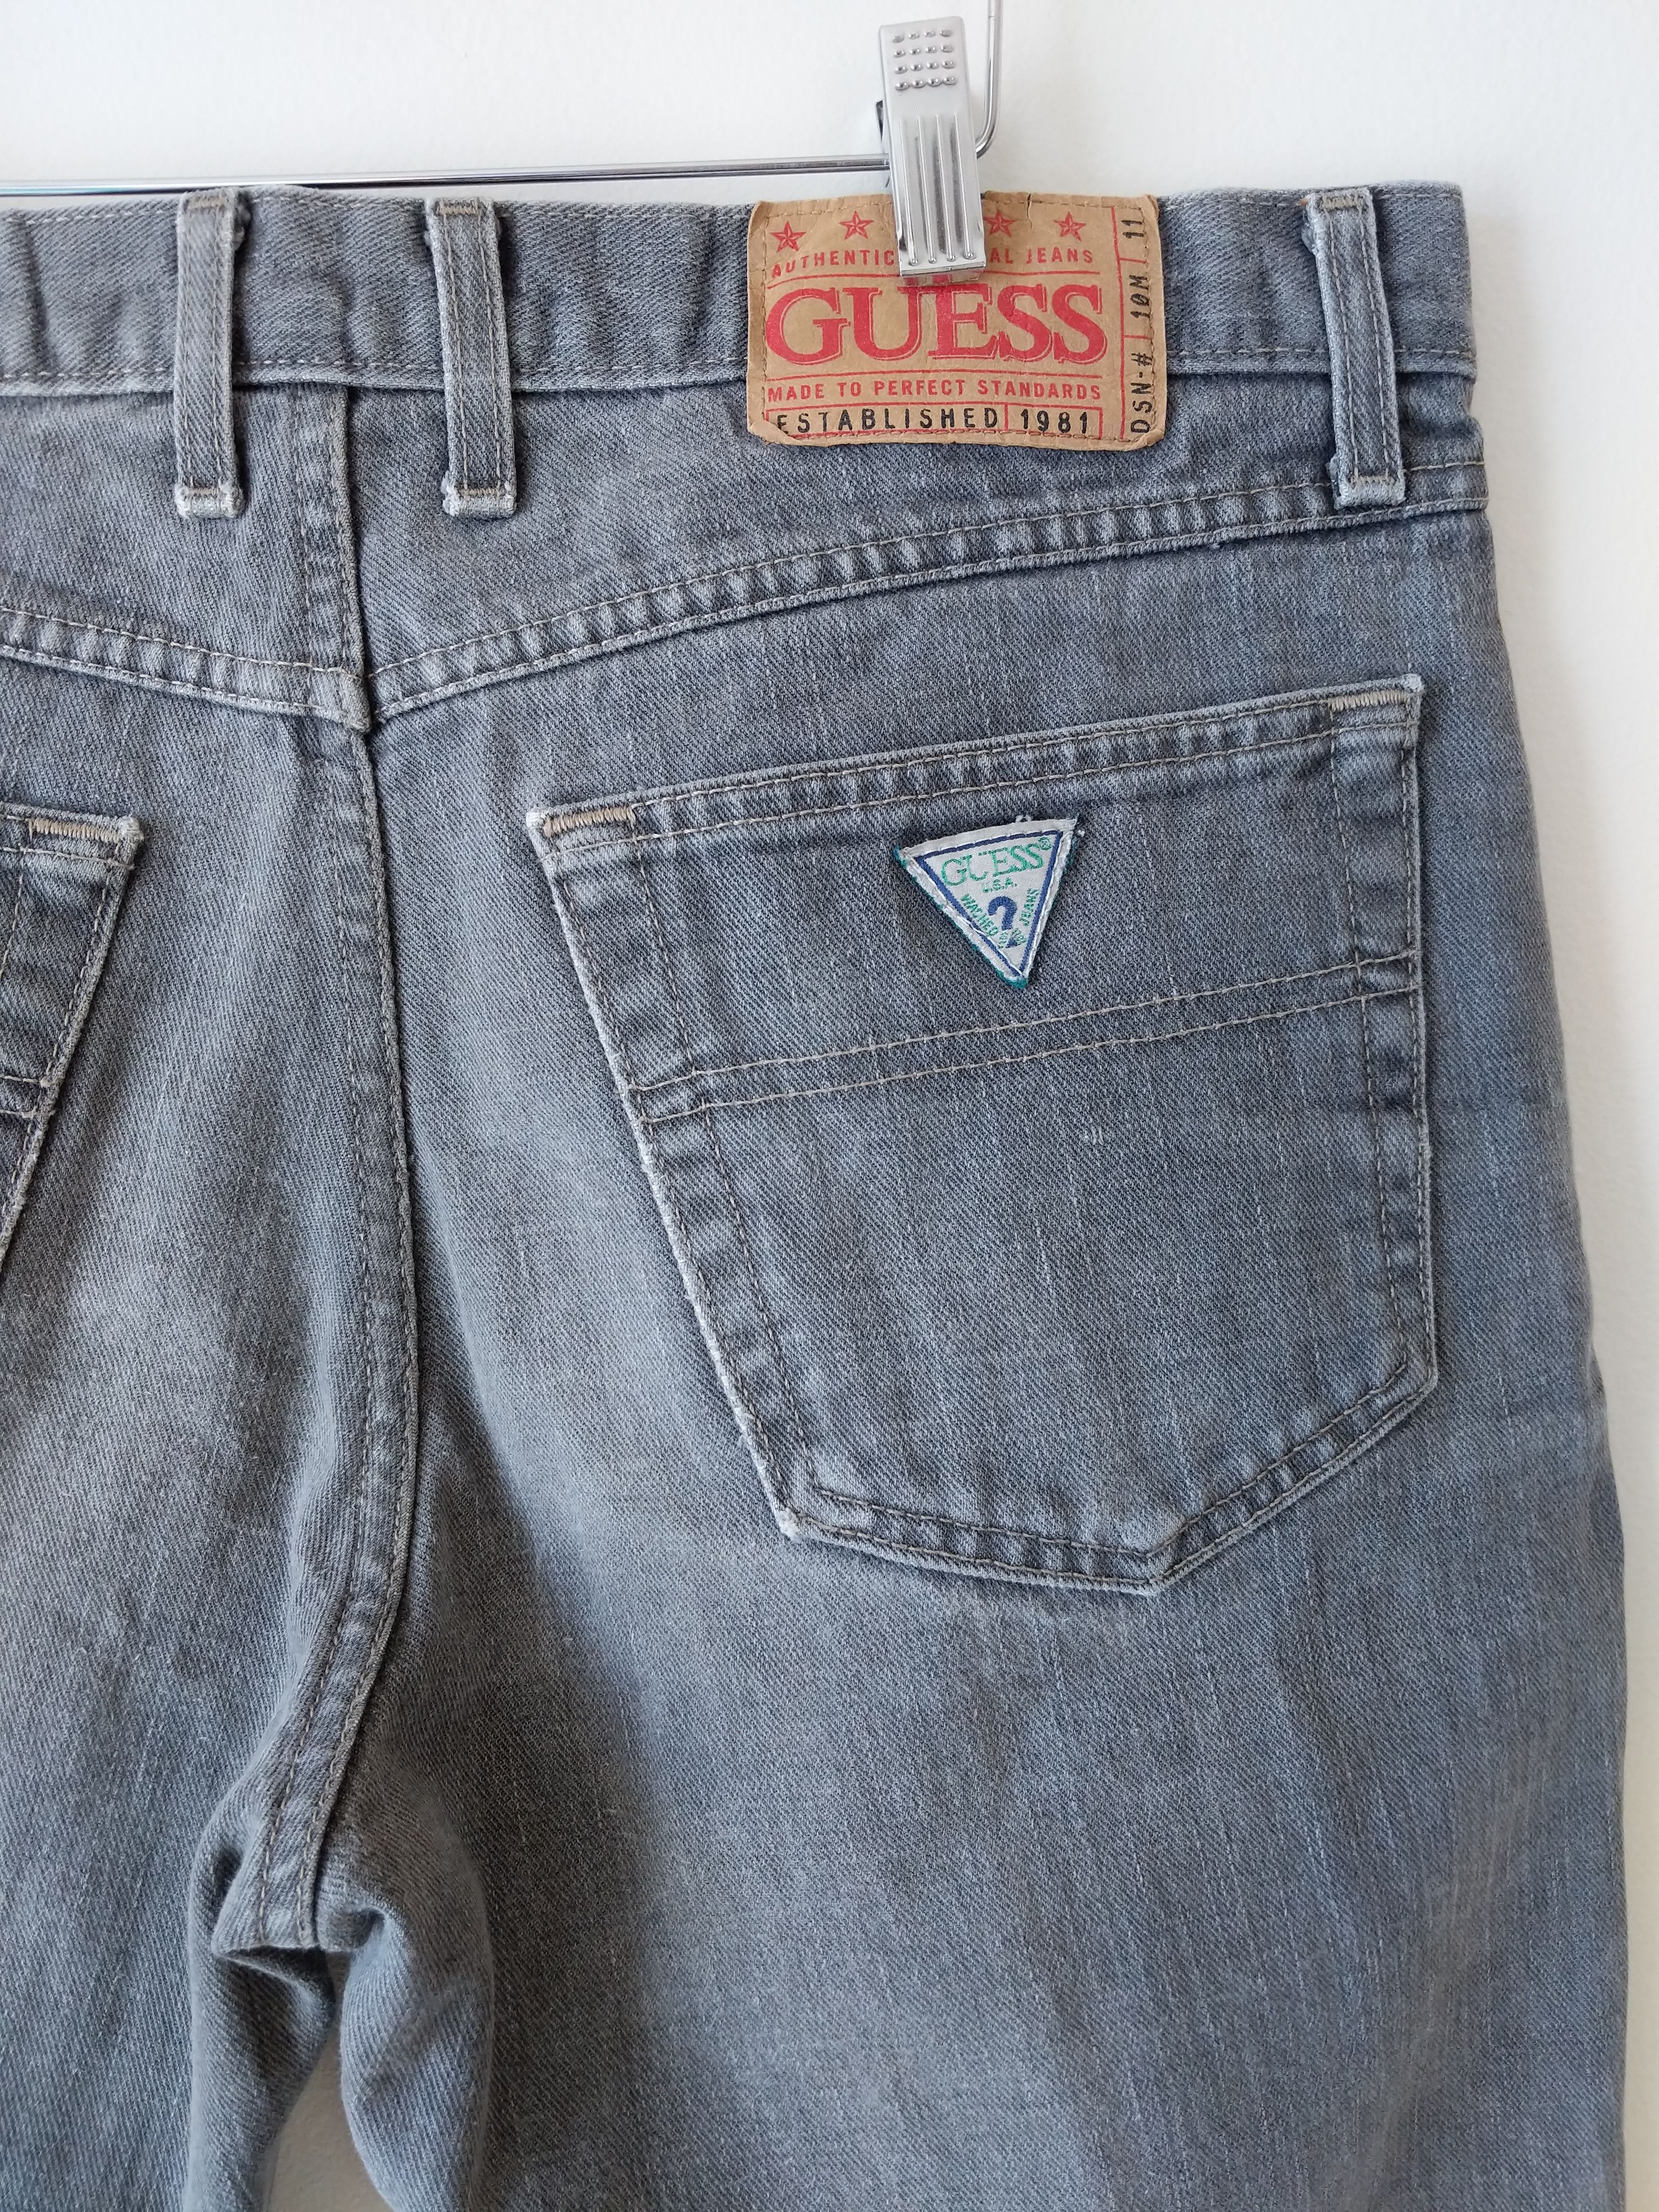 Vintage Vintage 90s Guess Grey Overdyed Distressed Jeans Triangle Size US 36 / EU 52 - 4 Thumbnail